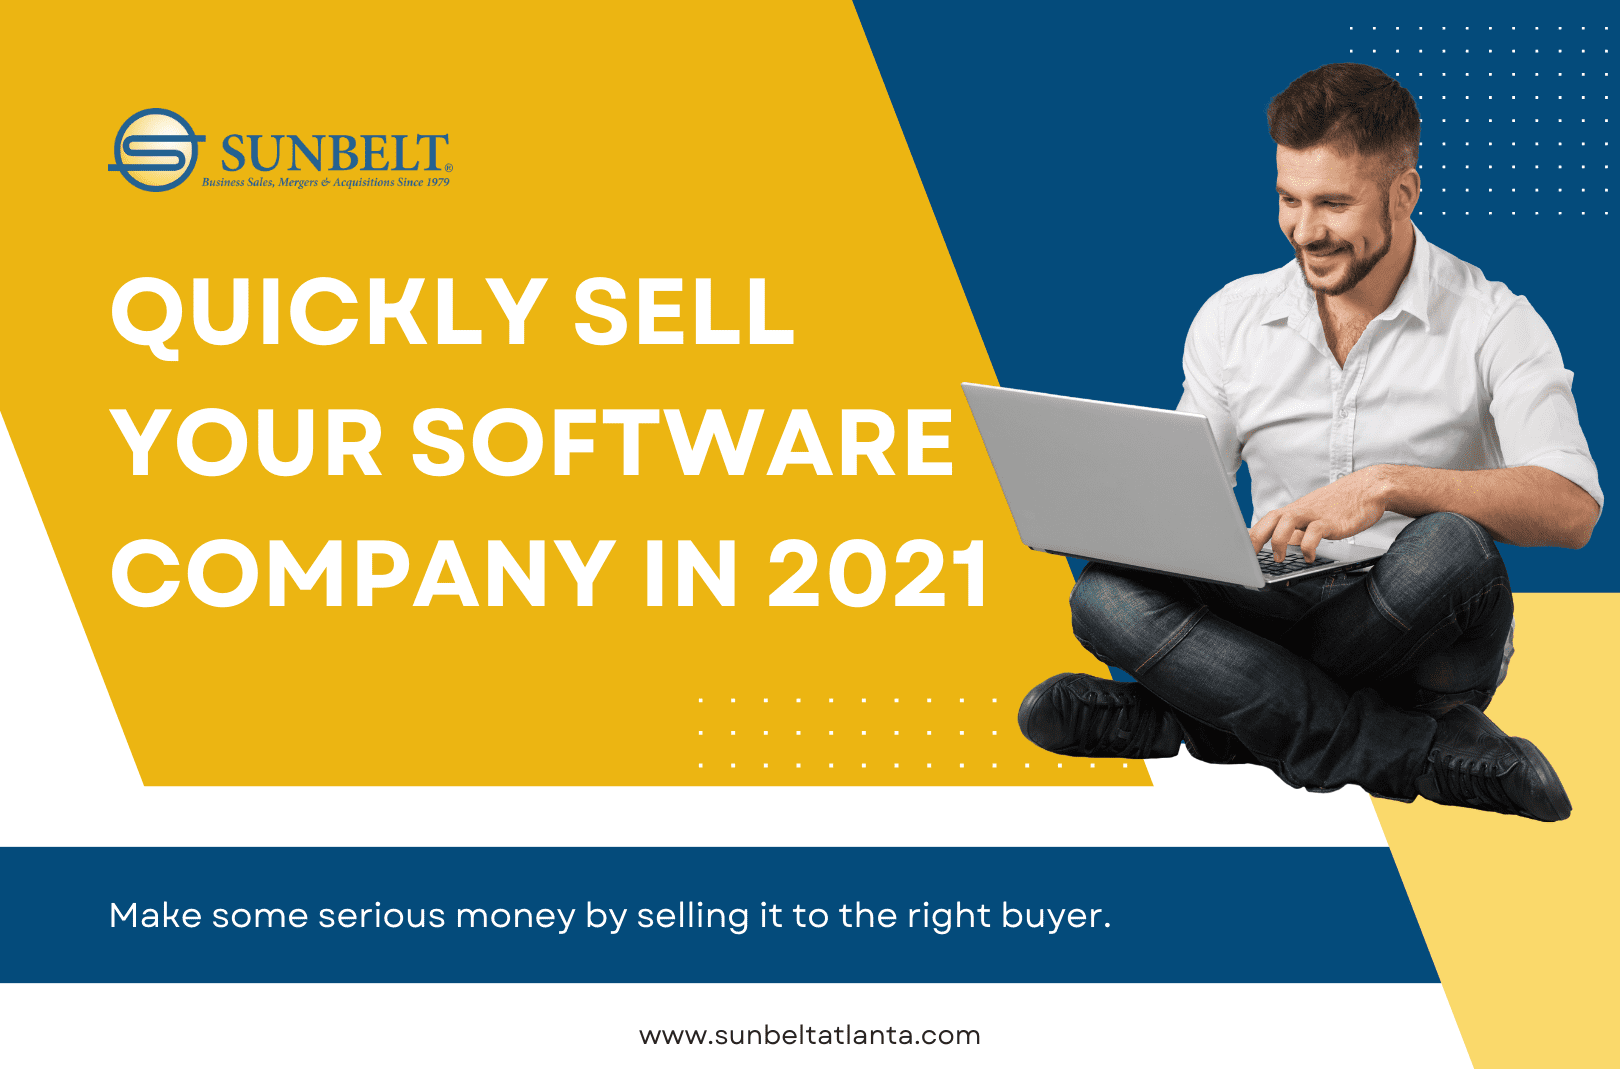 10 Tips for Quickly Selling a Software Company in 2021